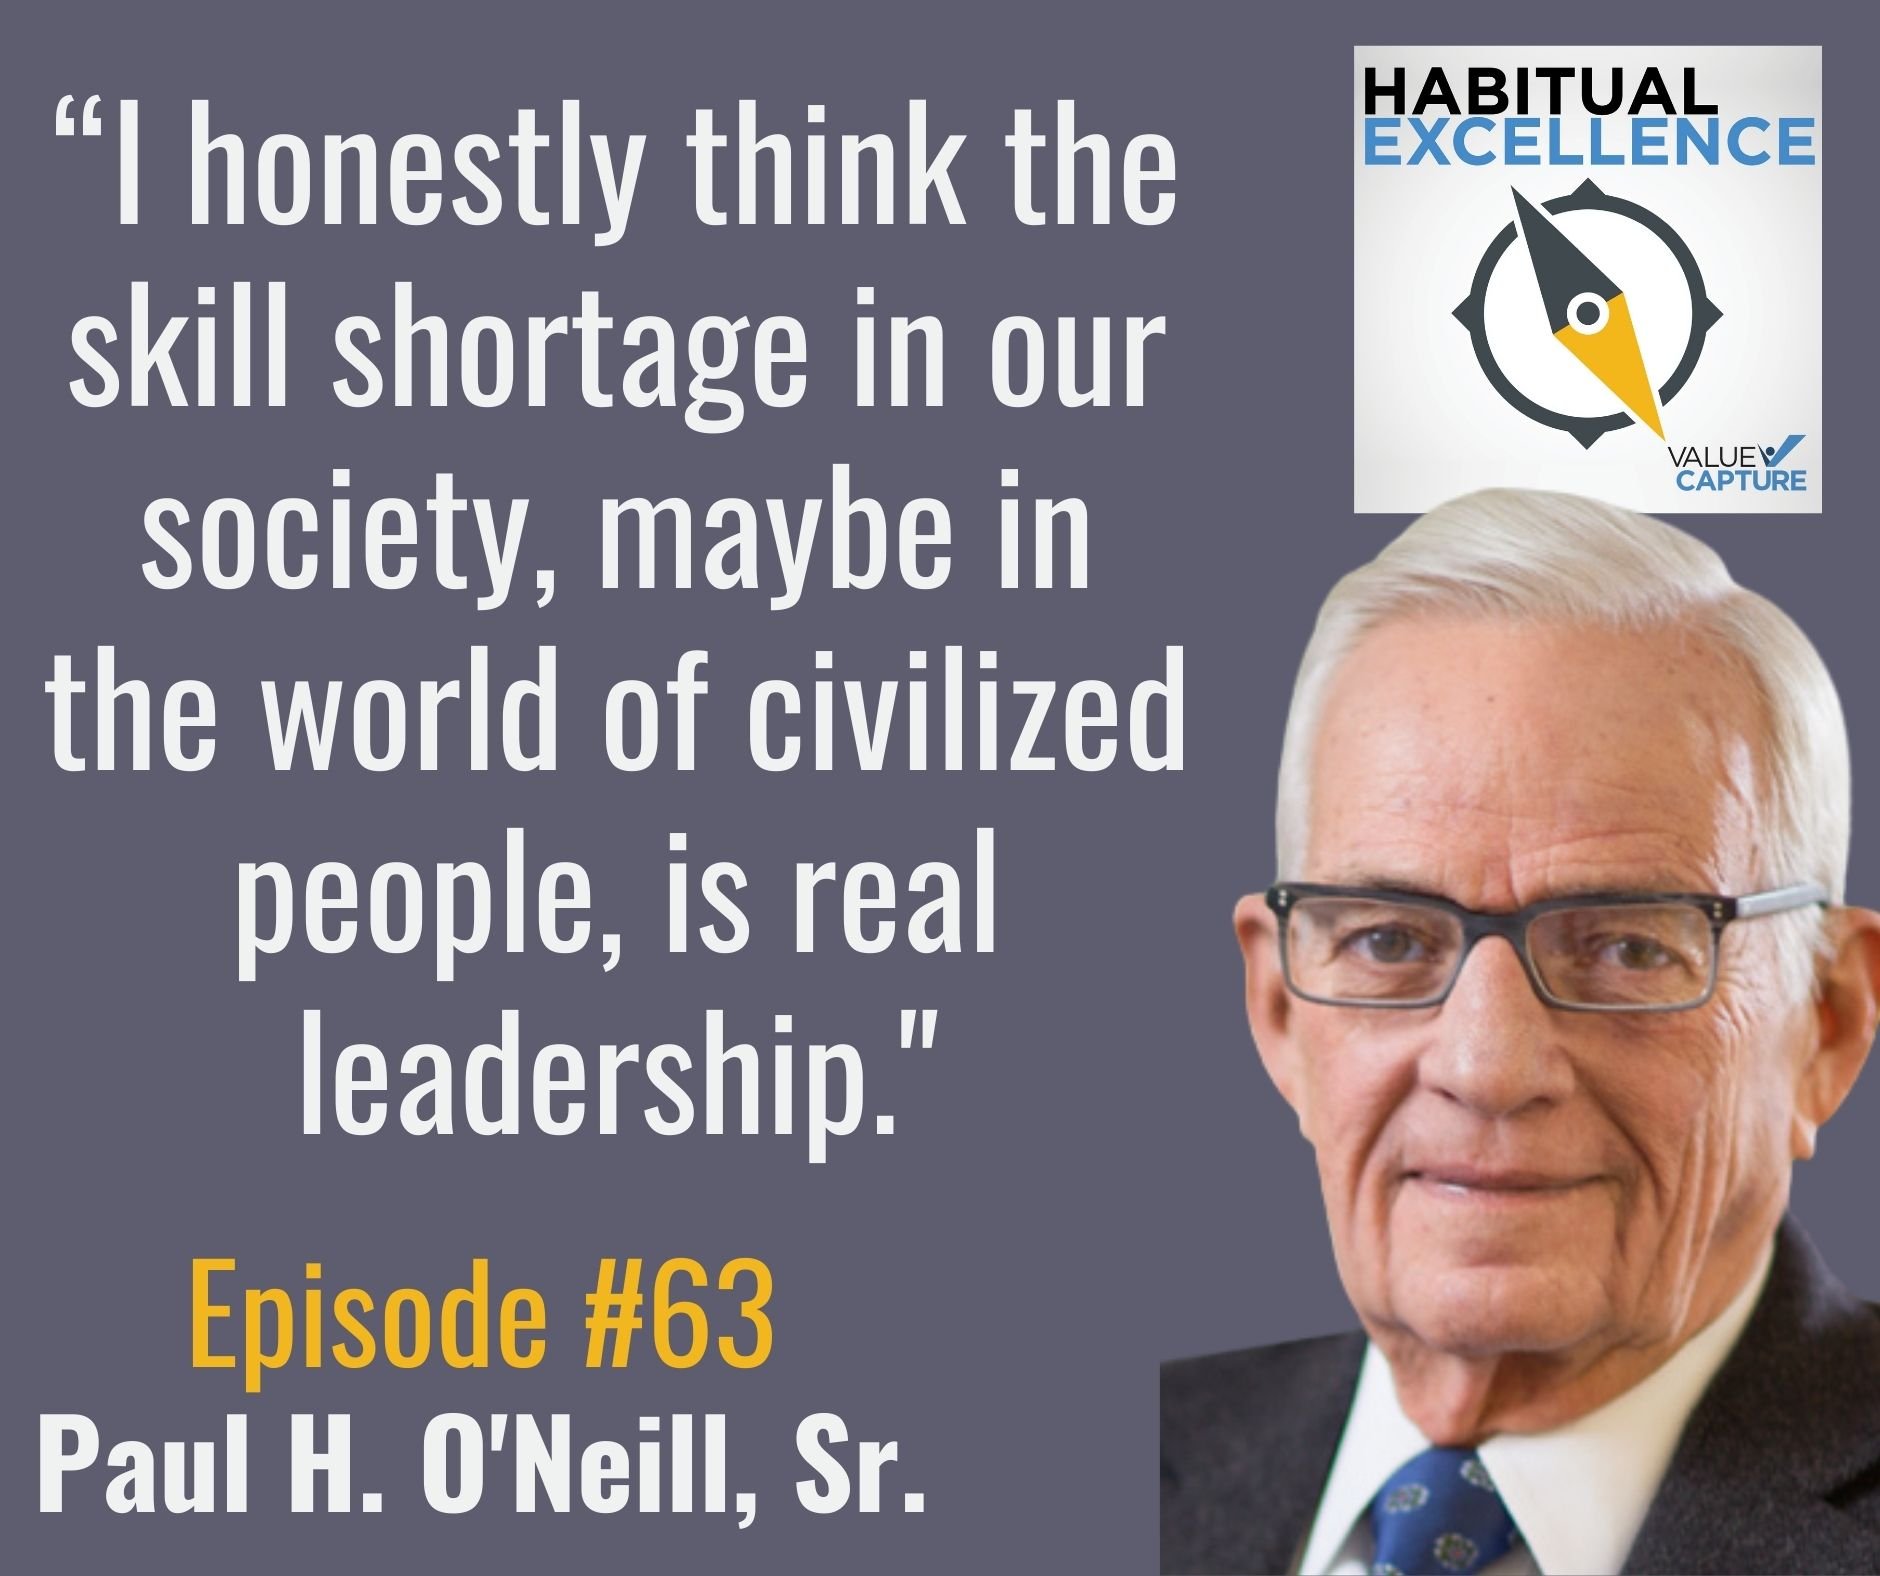 Paul H. O'Neill Sr.: A Podcast From 2011 on Safety, Leadership